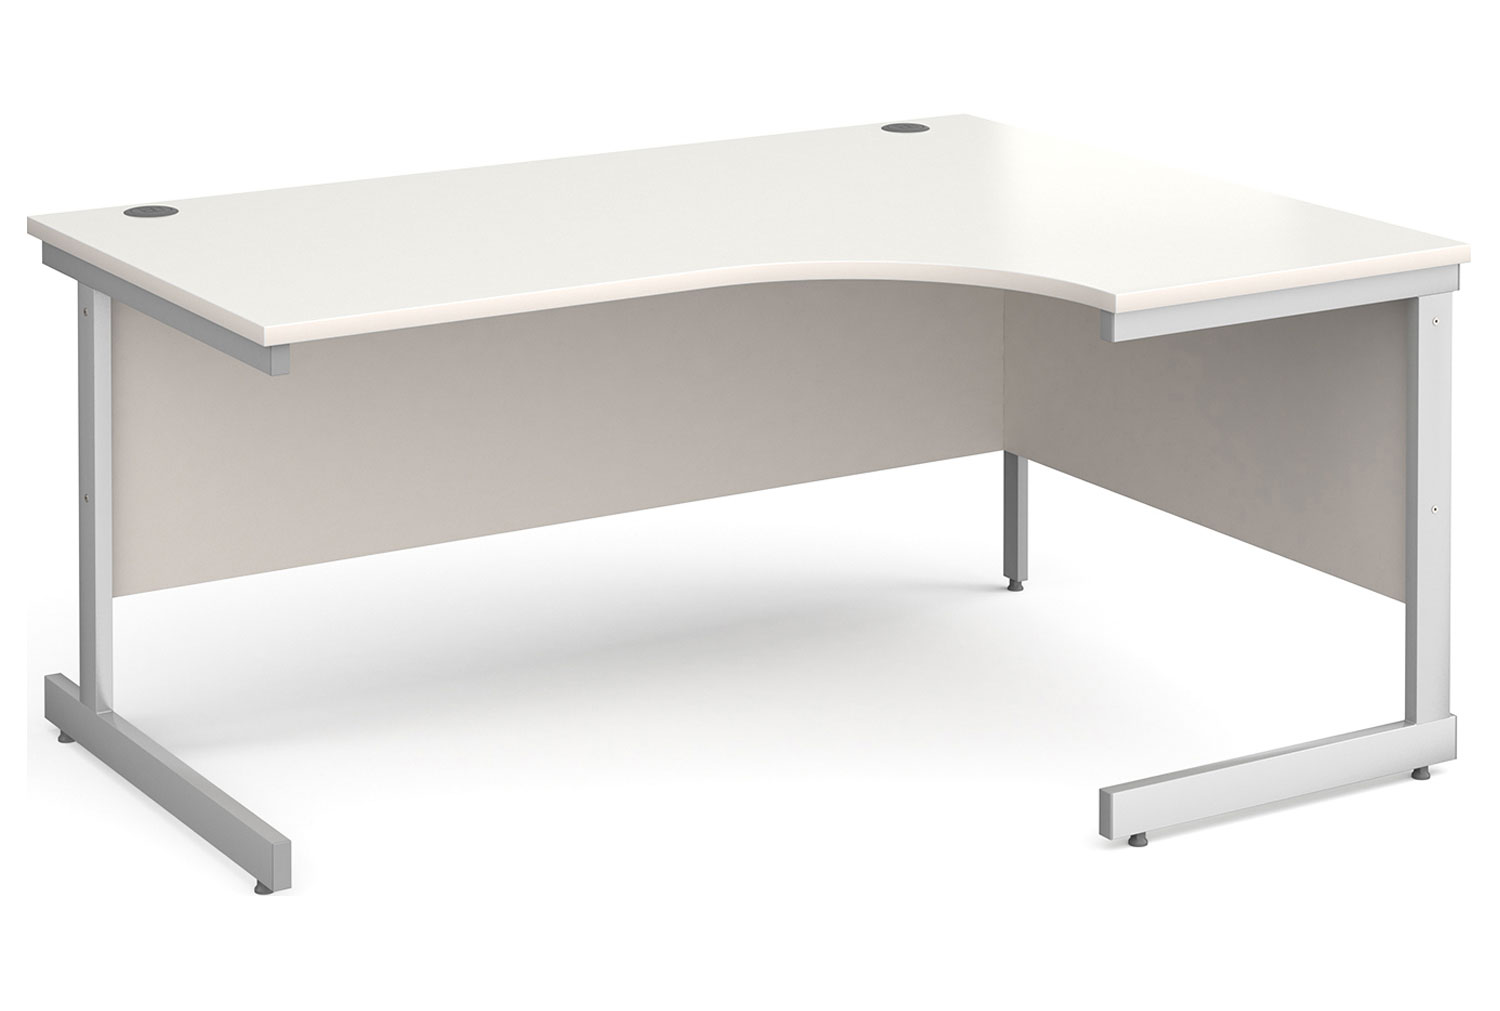 All White C-Leg Ergonomic Office Desk Right, 160wx120/80dx73h (cm), Express Delivery